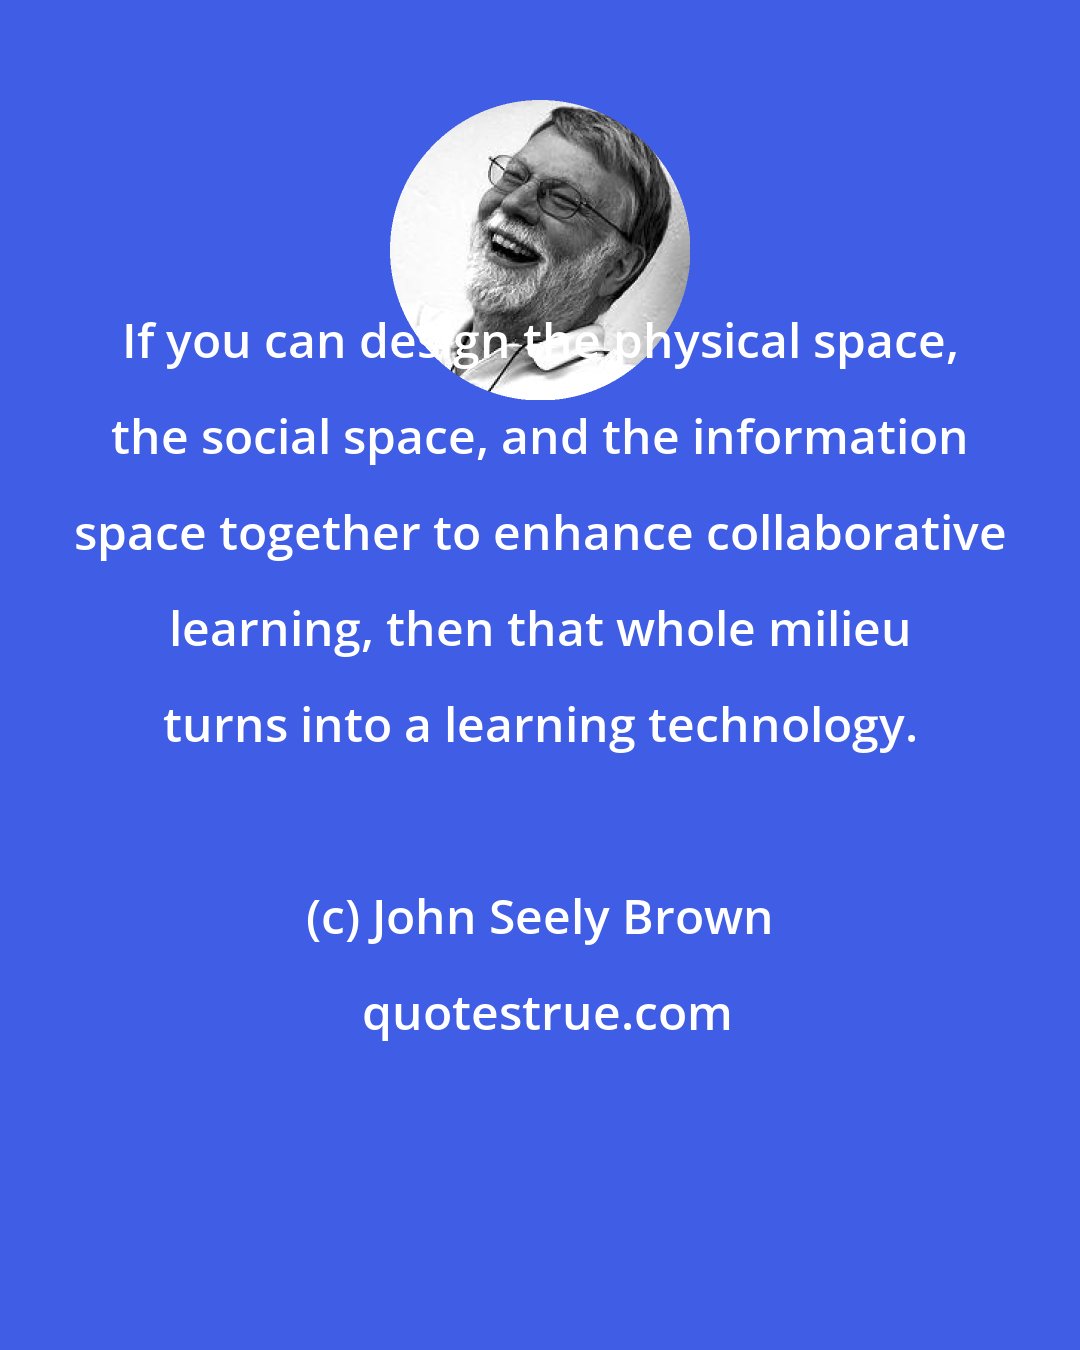 John Seely Brown: If you can design the physical space, the social space, and the information space together to enhance collaborative learning, then that whole milieu turns into a learning technology.